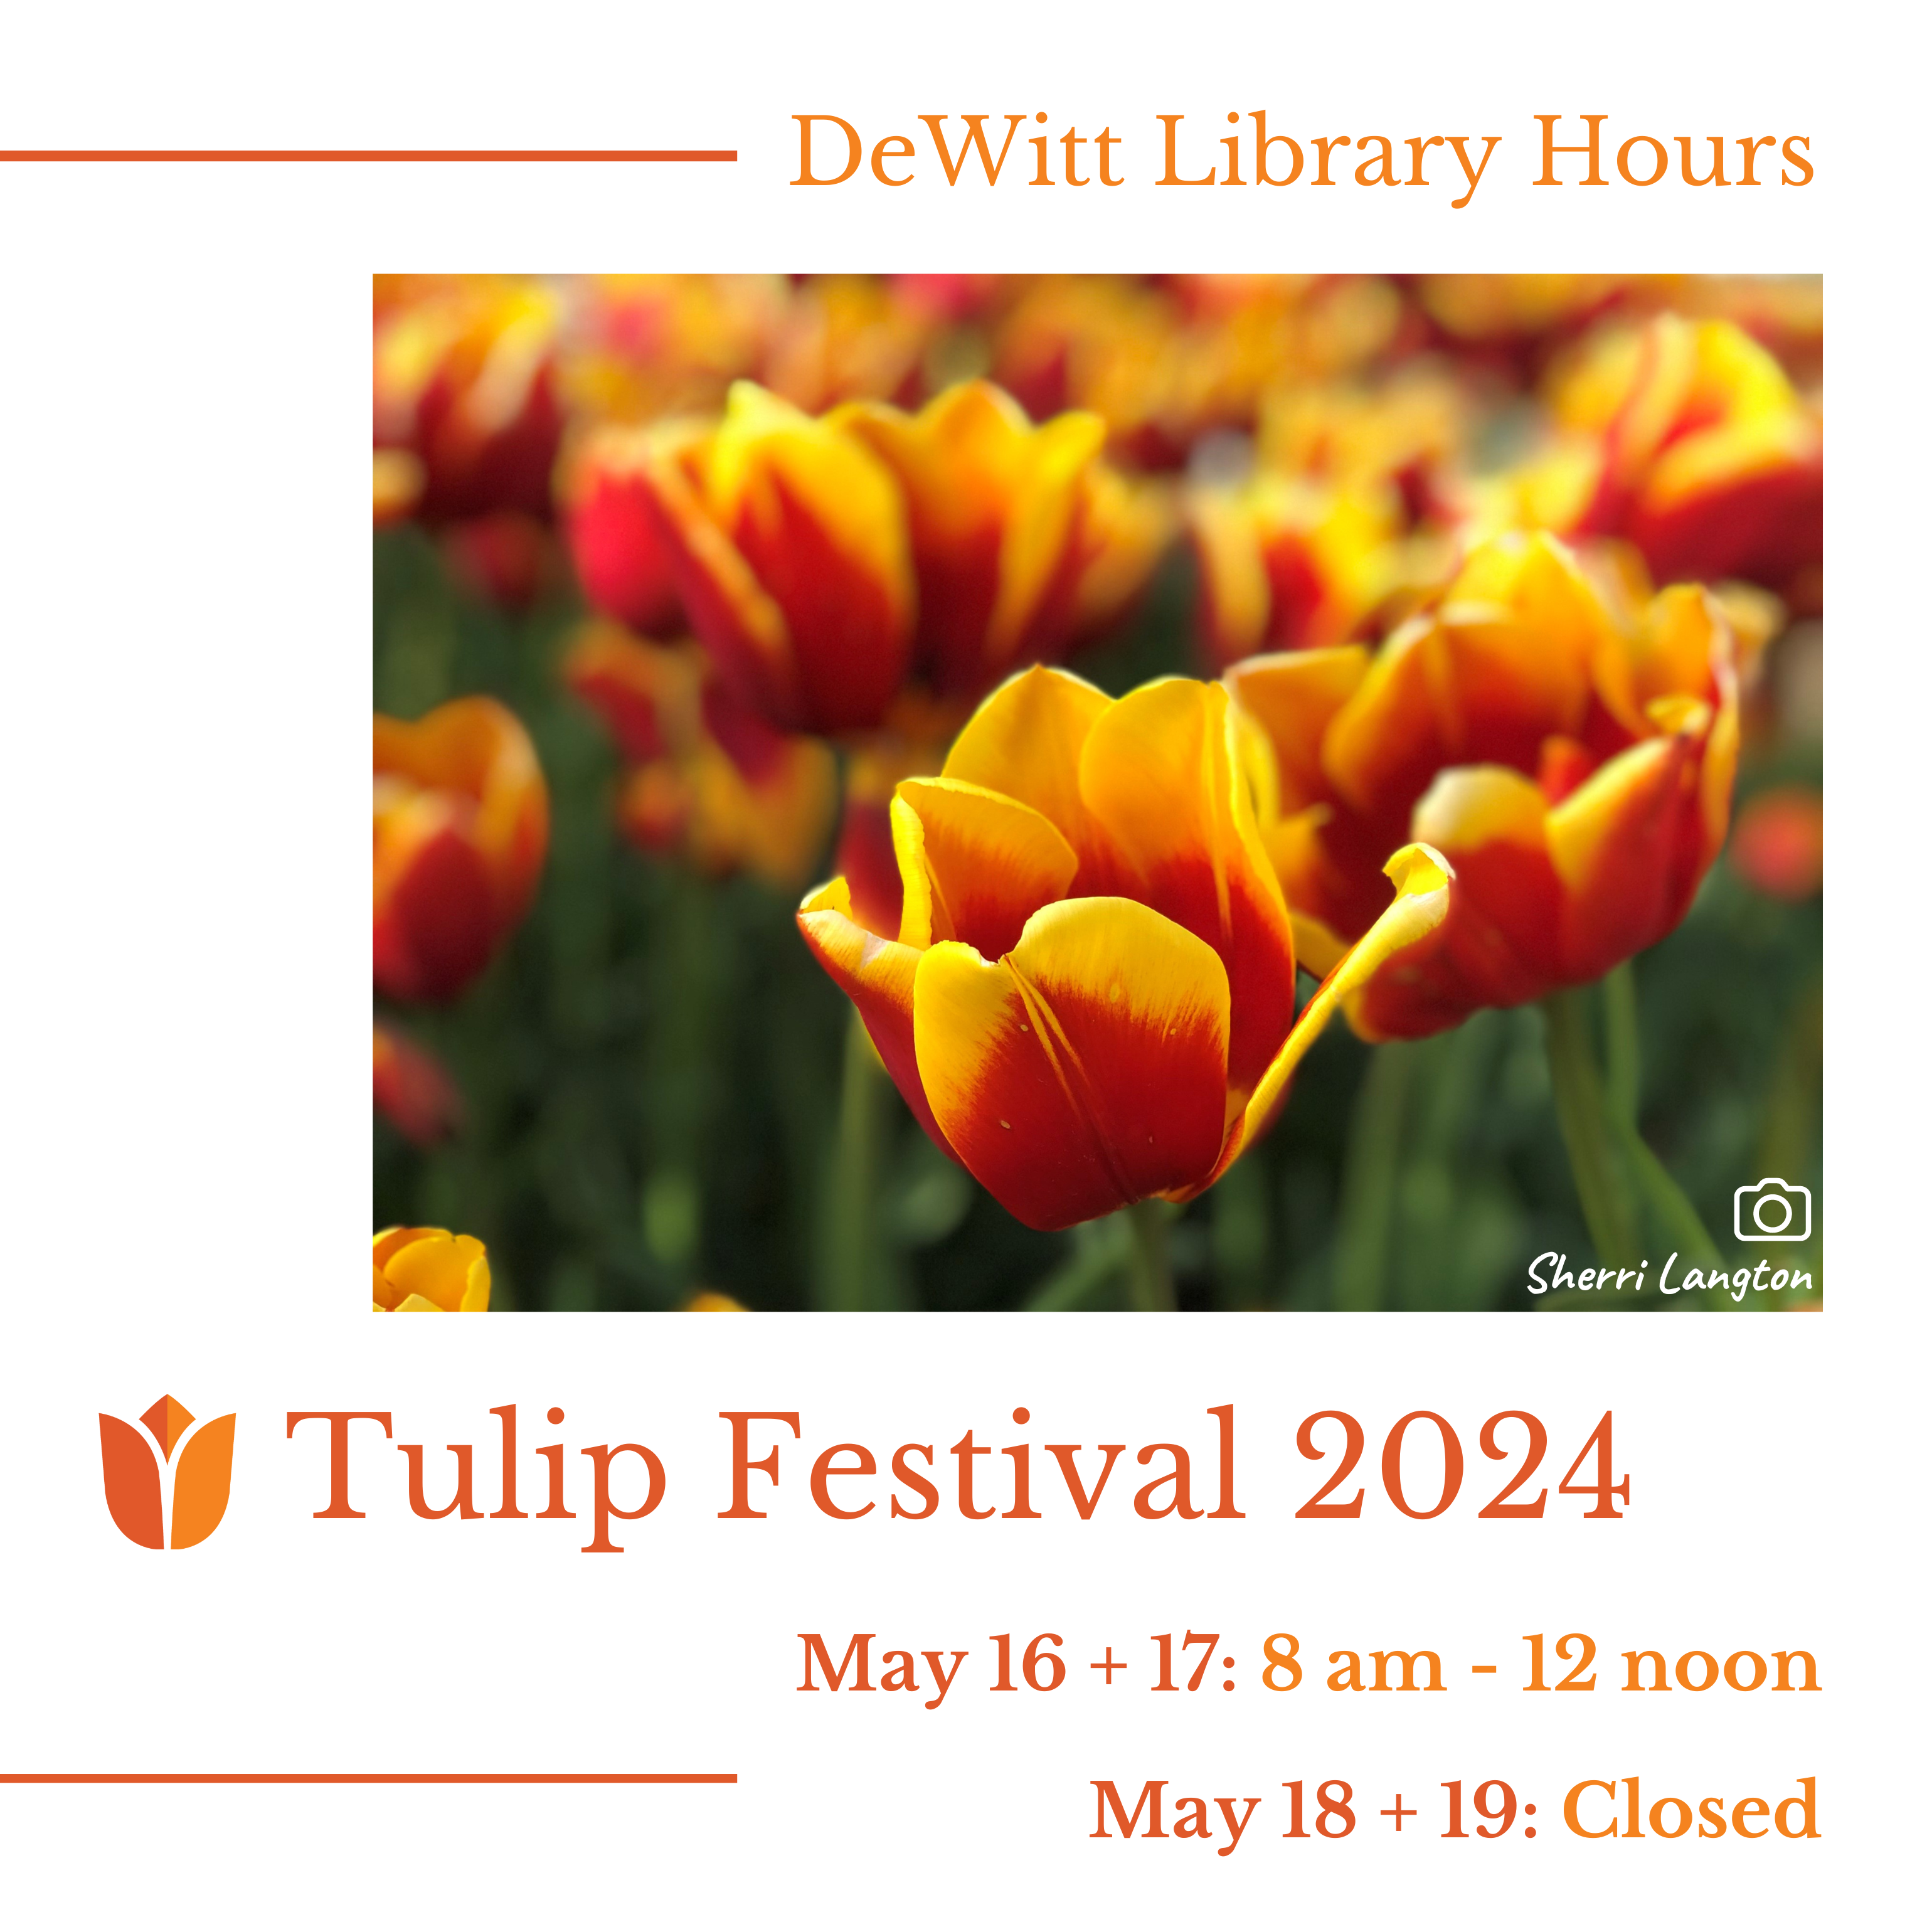 DeWitt Library Hours - Tulip Festival 2024: May 16 + 17: 8 am - 12 noon; May 18 + 19: Closed.